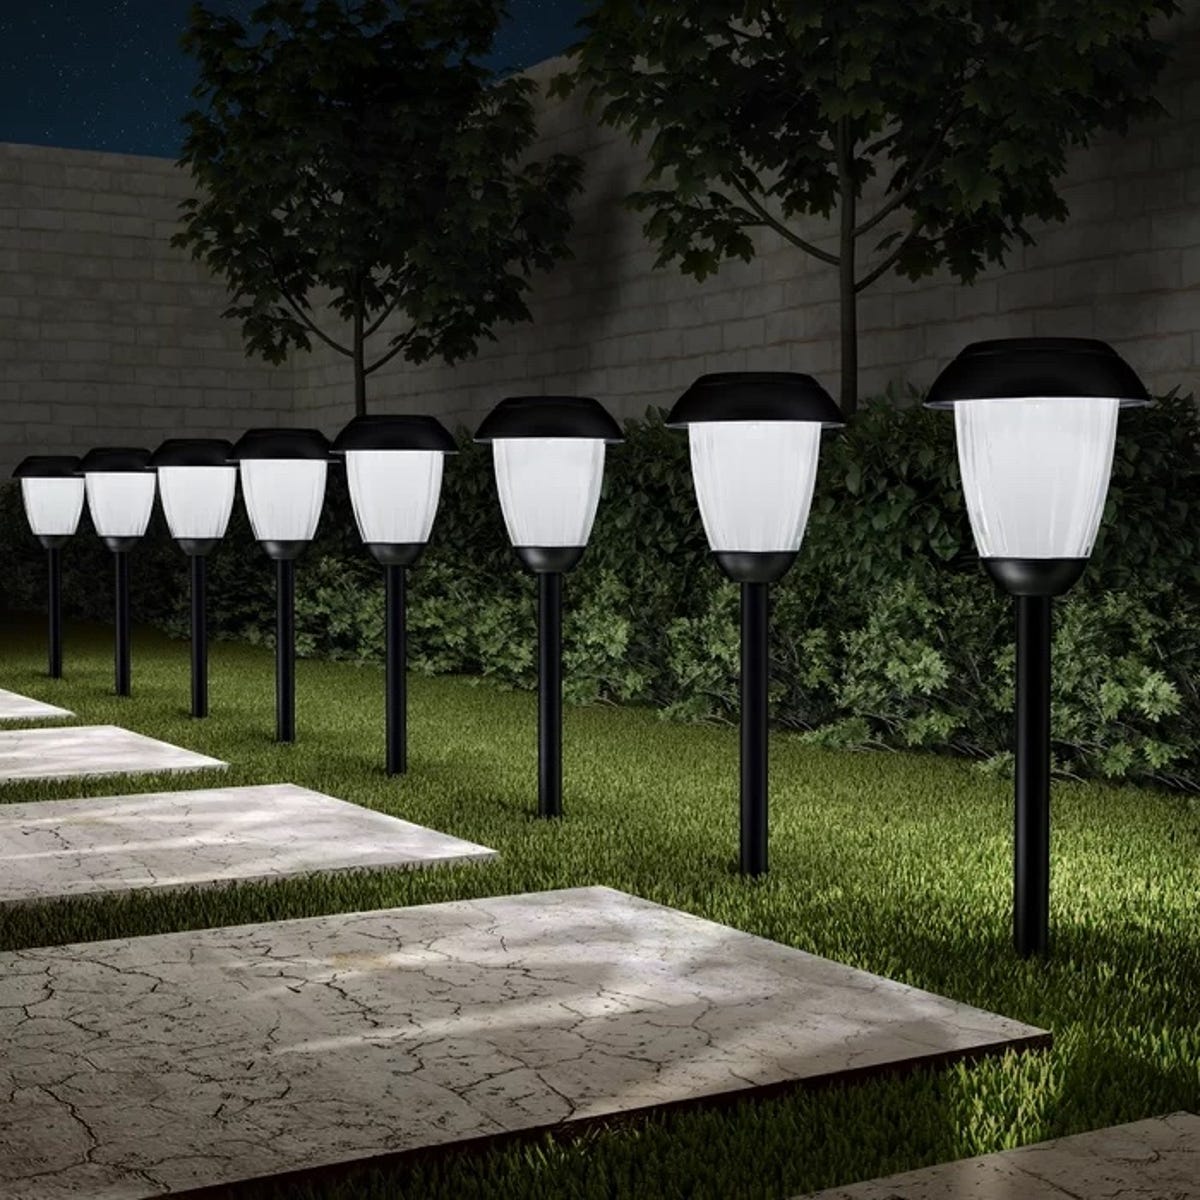 Low voltage outdoor lights that are lighting up a pathway